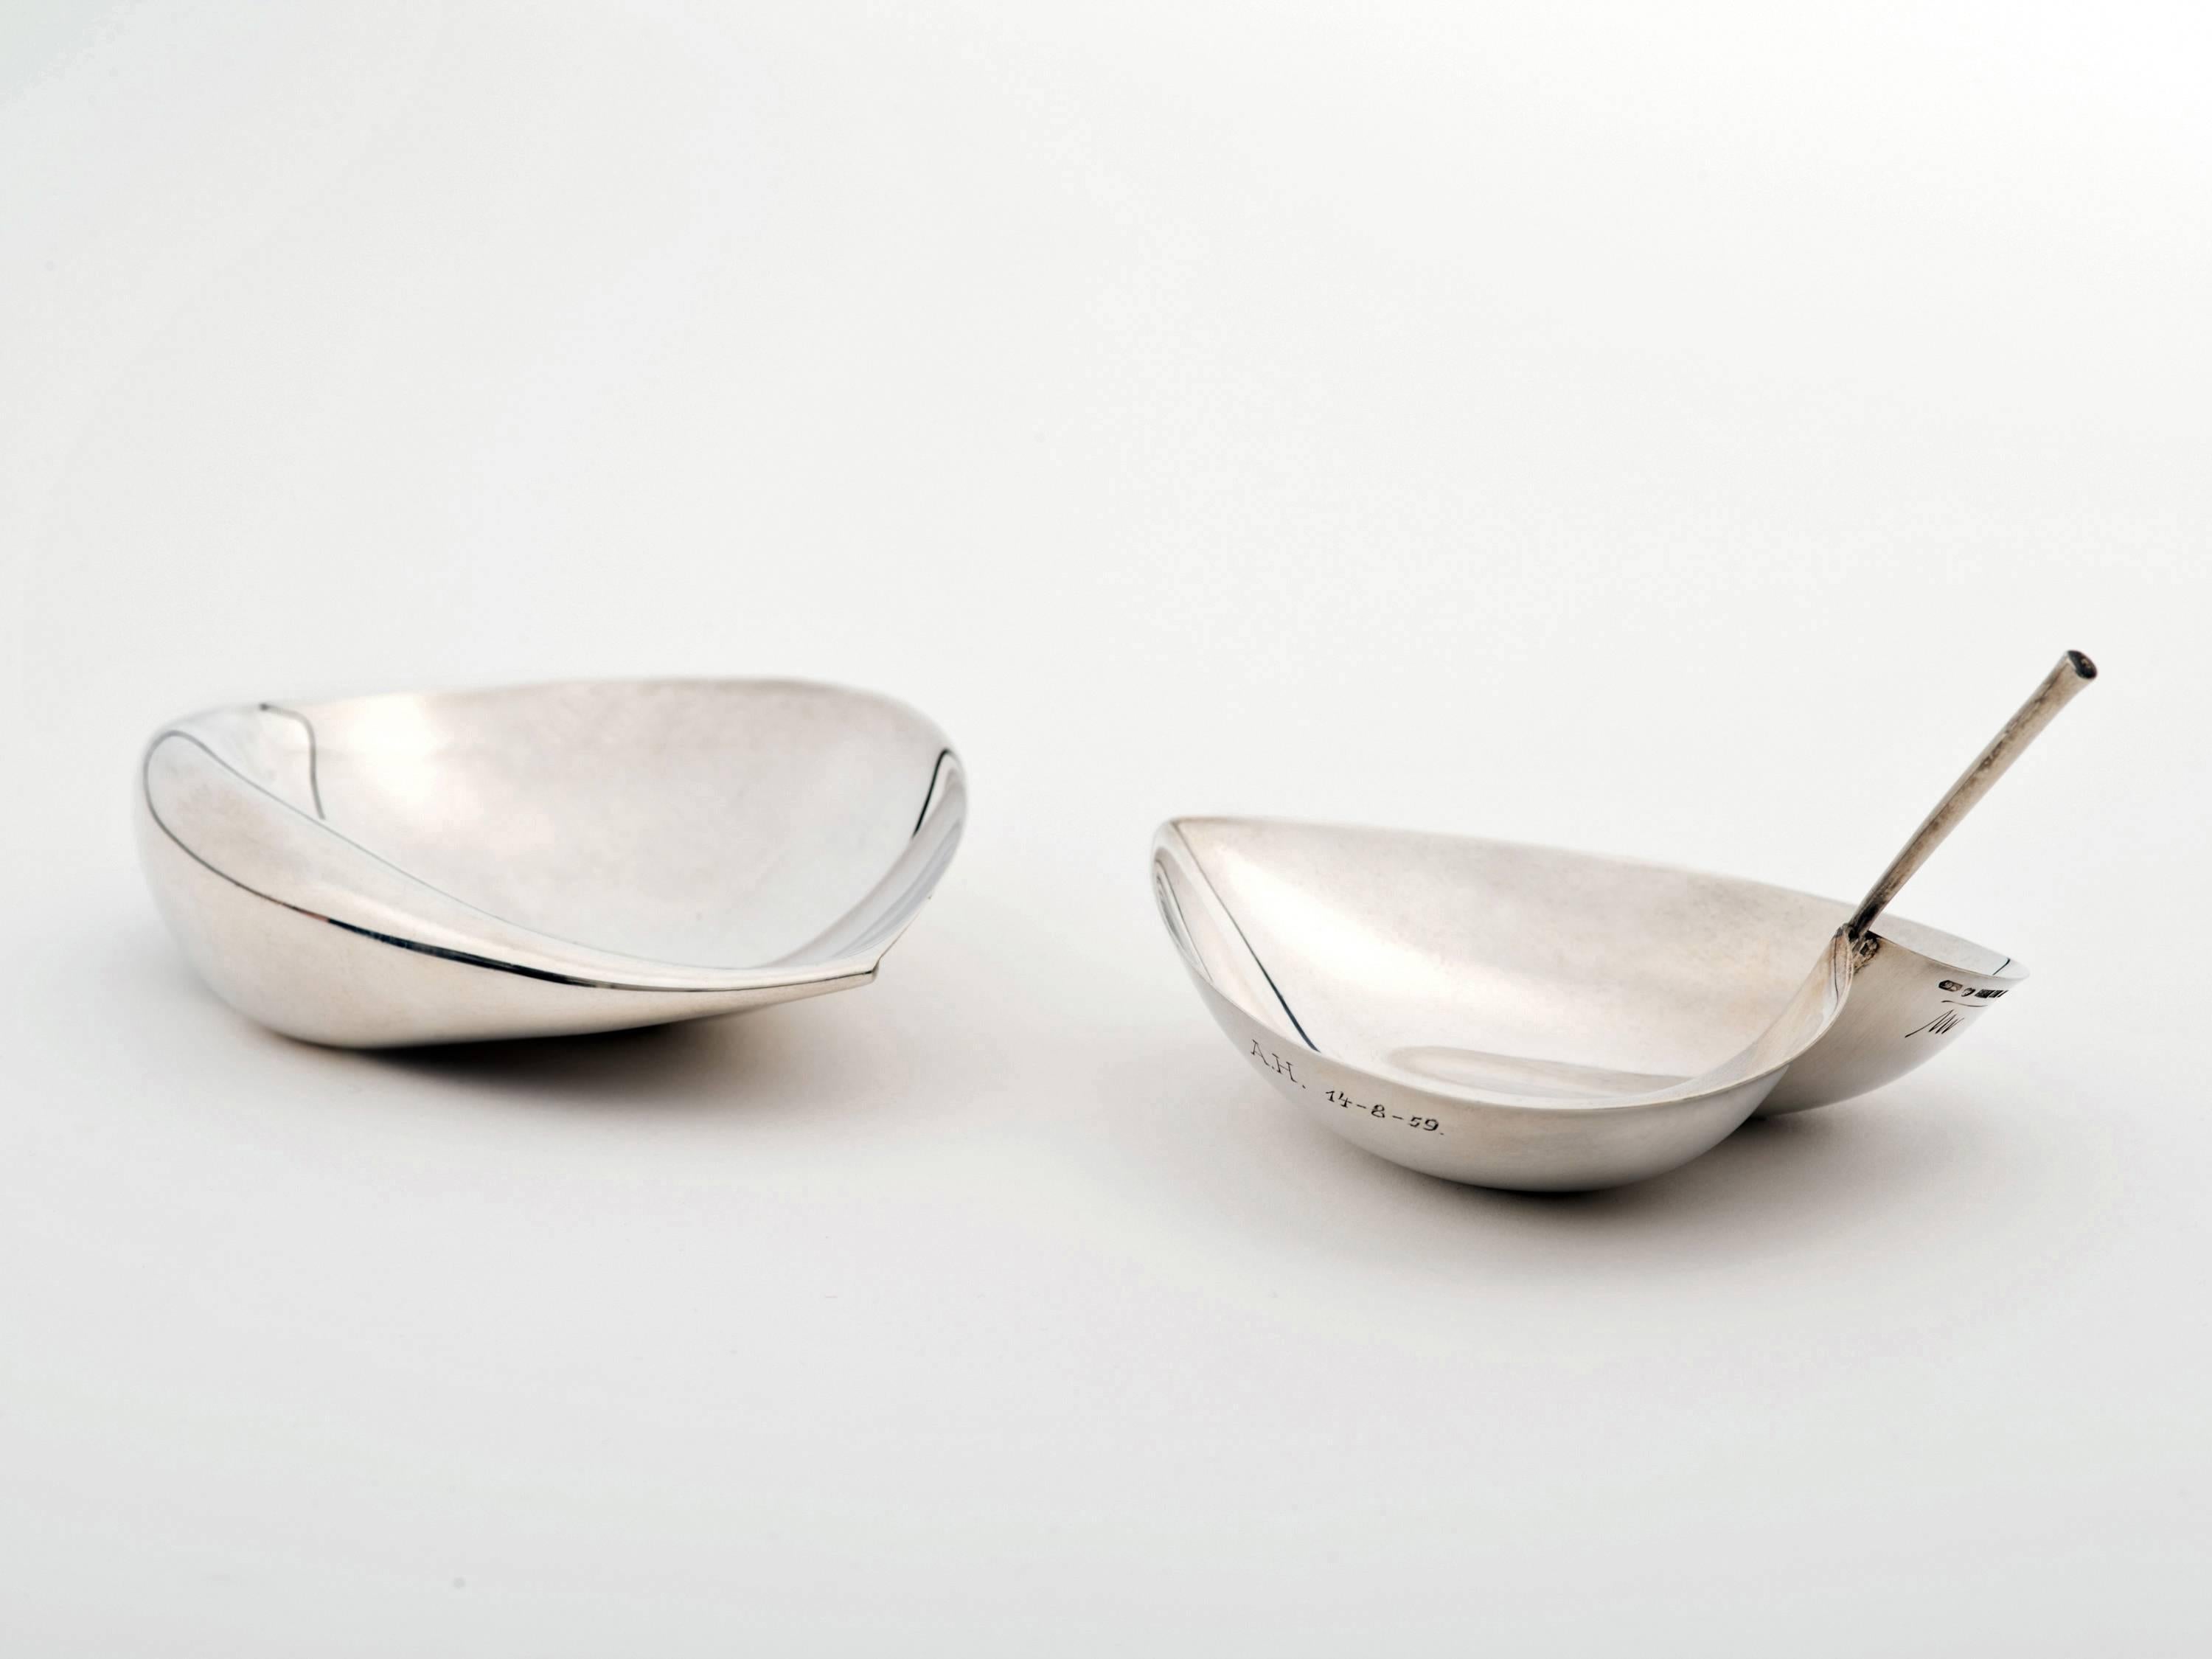 An elegant pair of leaf form dishes, models TW-5 (l.) and TW-4 (r.), designed by Tapio Wirkkala for Kultakeskus Oy. Both are in fine condition with all requisite hallmarks and 